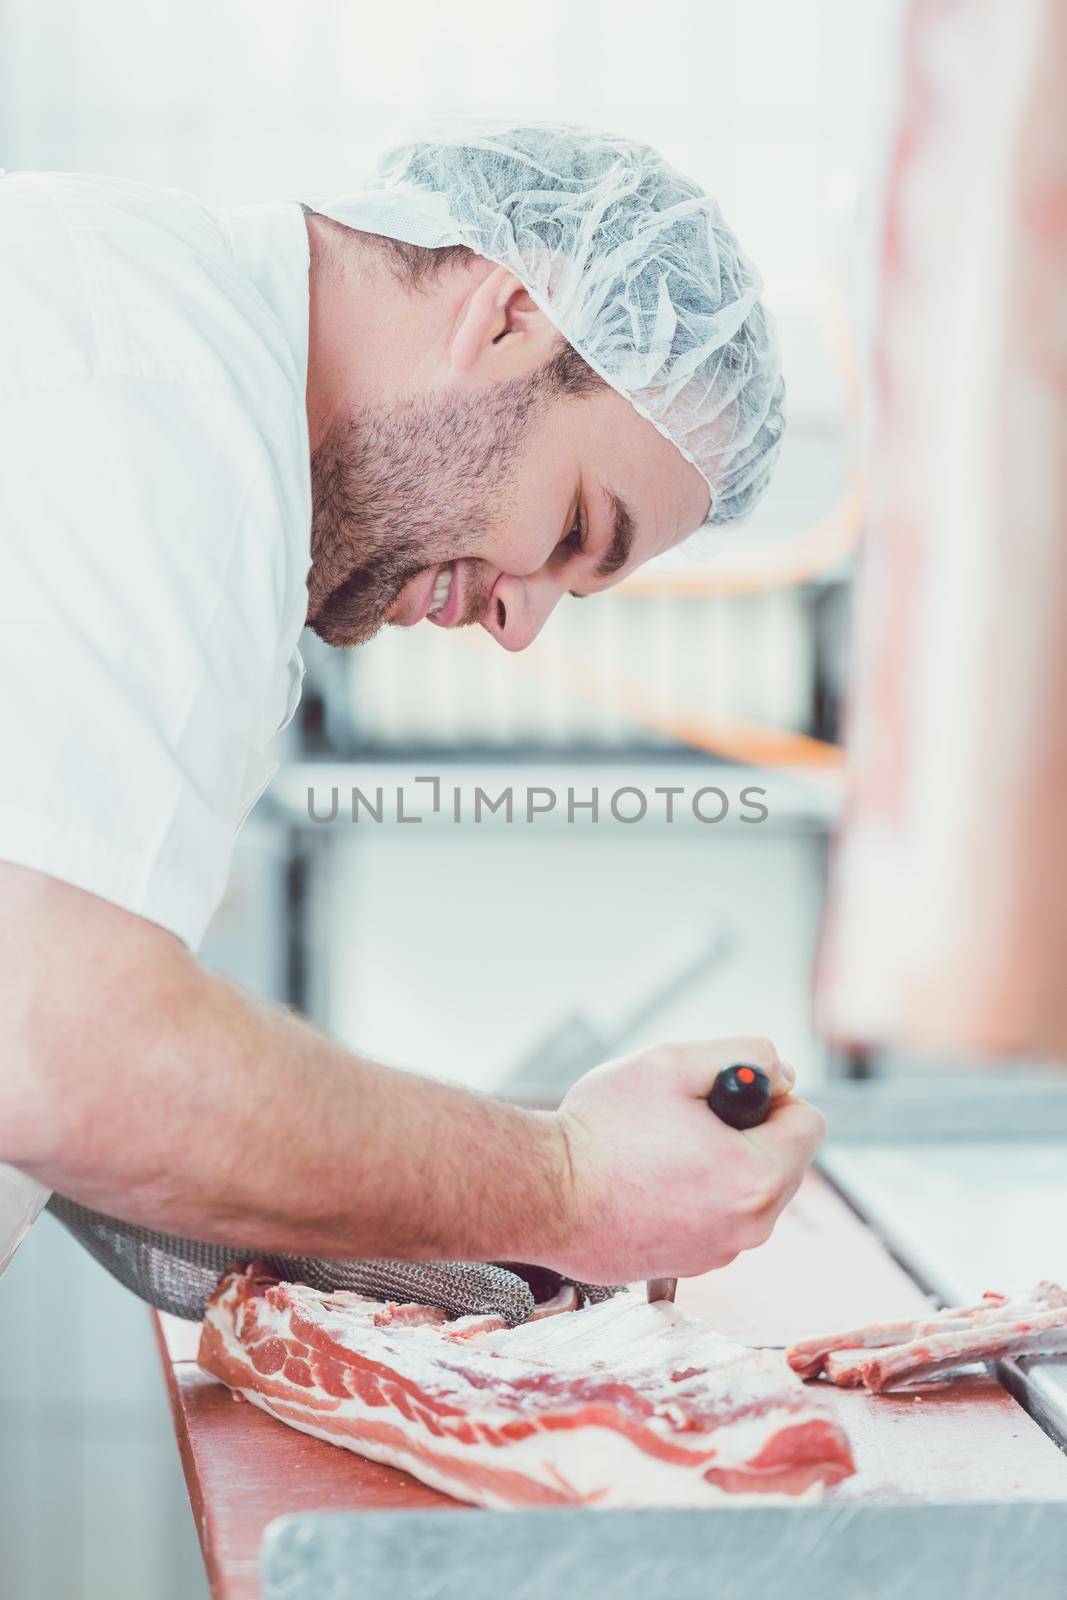 Pork Meat being processed in a butchery by man